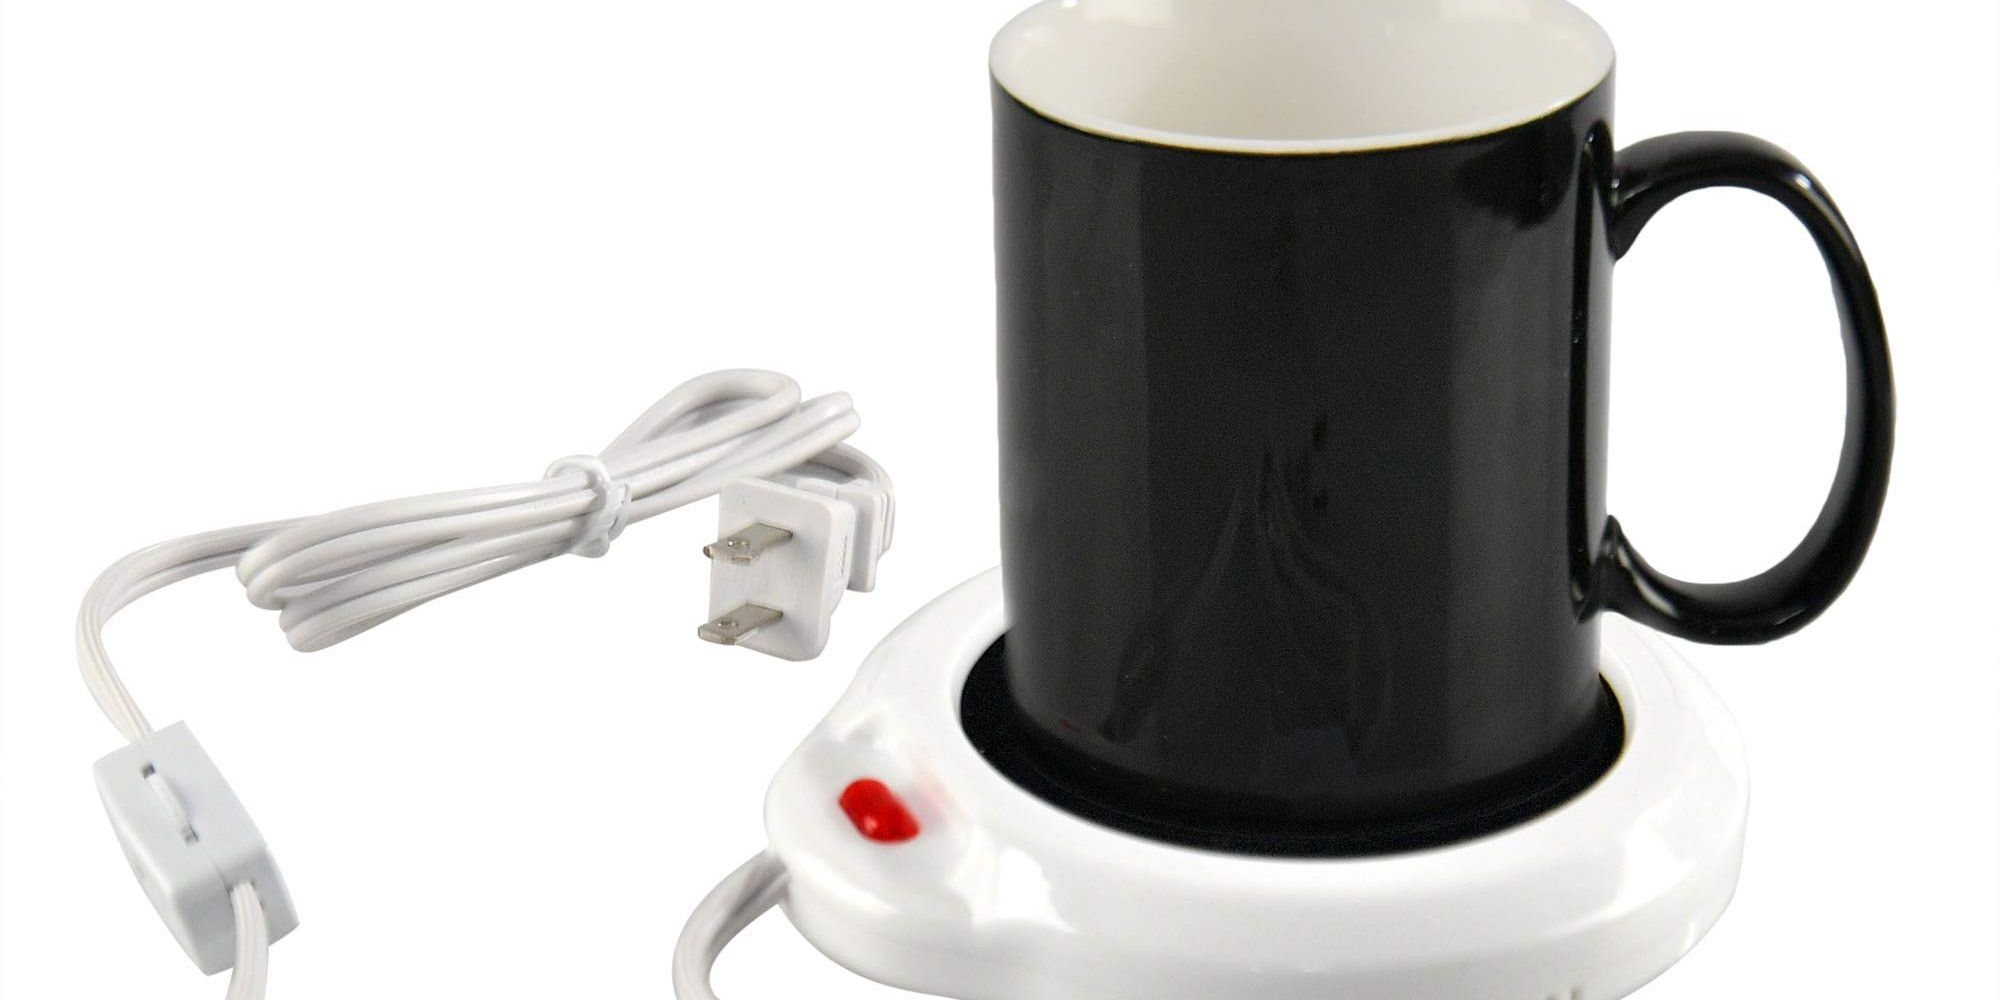 Black mug on white thermal coasters with cord